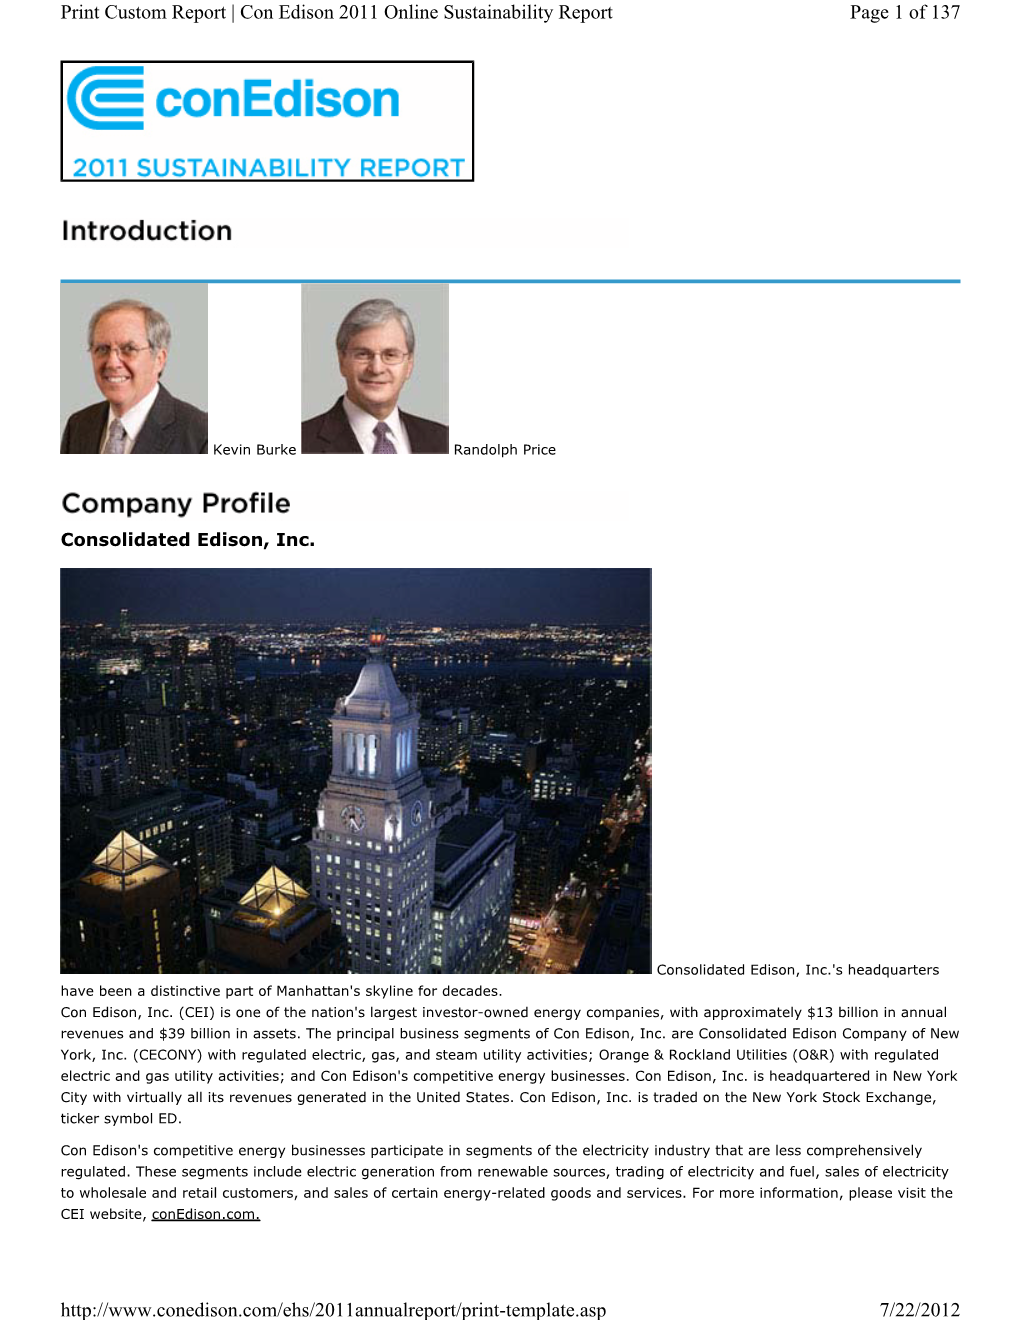 Page 1 of 137 Print Custom Report | Con Edison 2011 Online Sustainability Report 7/22/2012